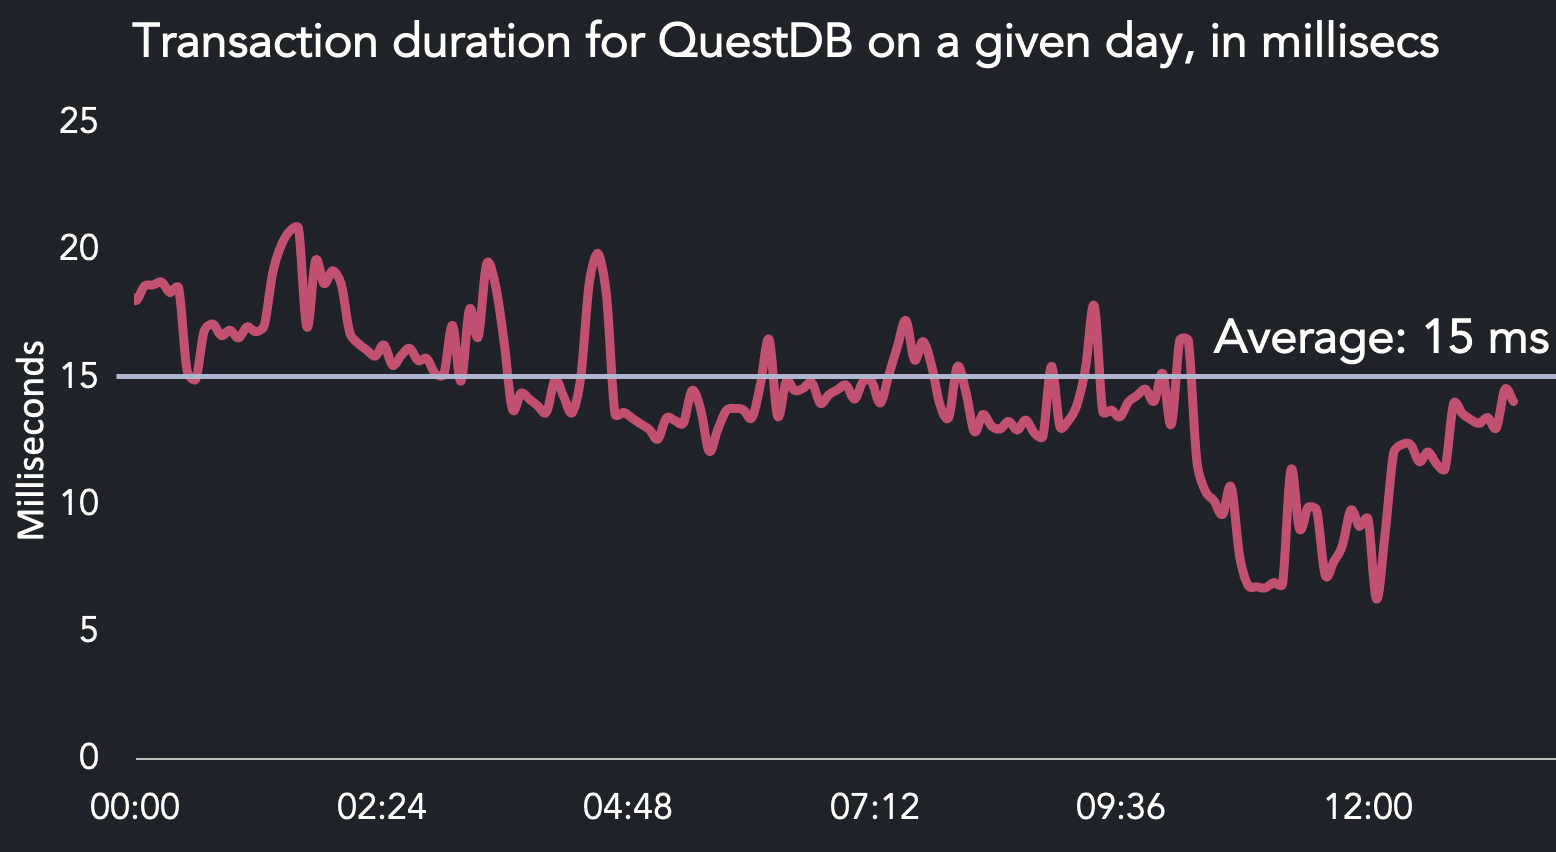 Chart showing the average transaction duration for QuestDB on a given day